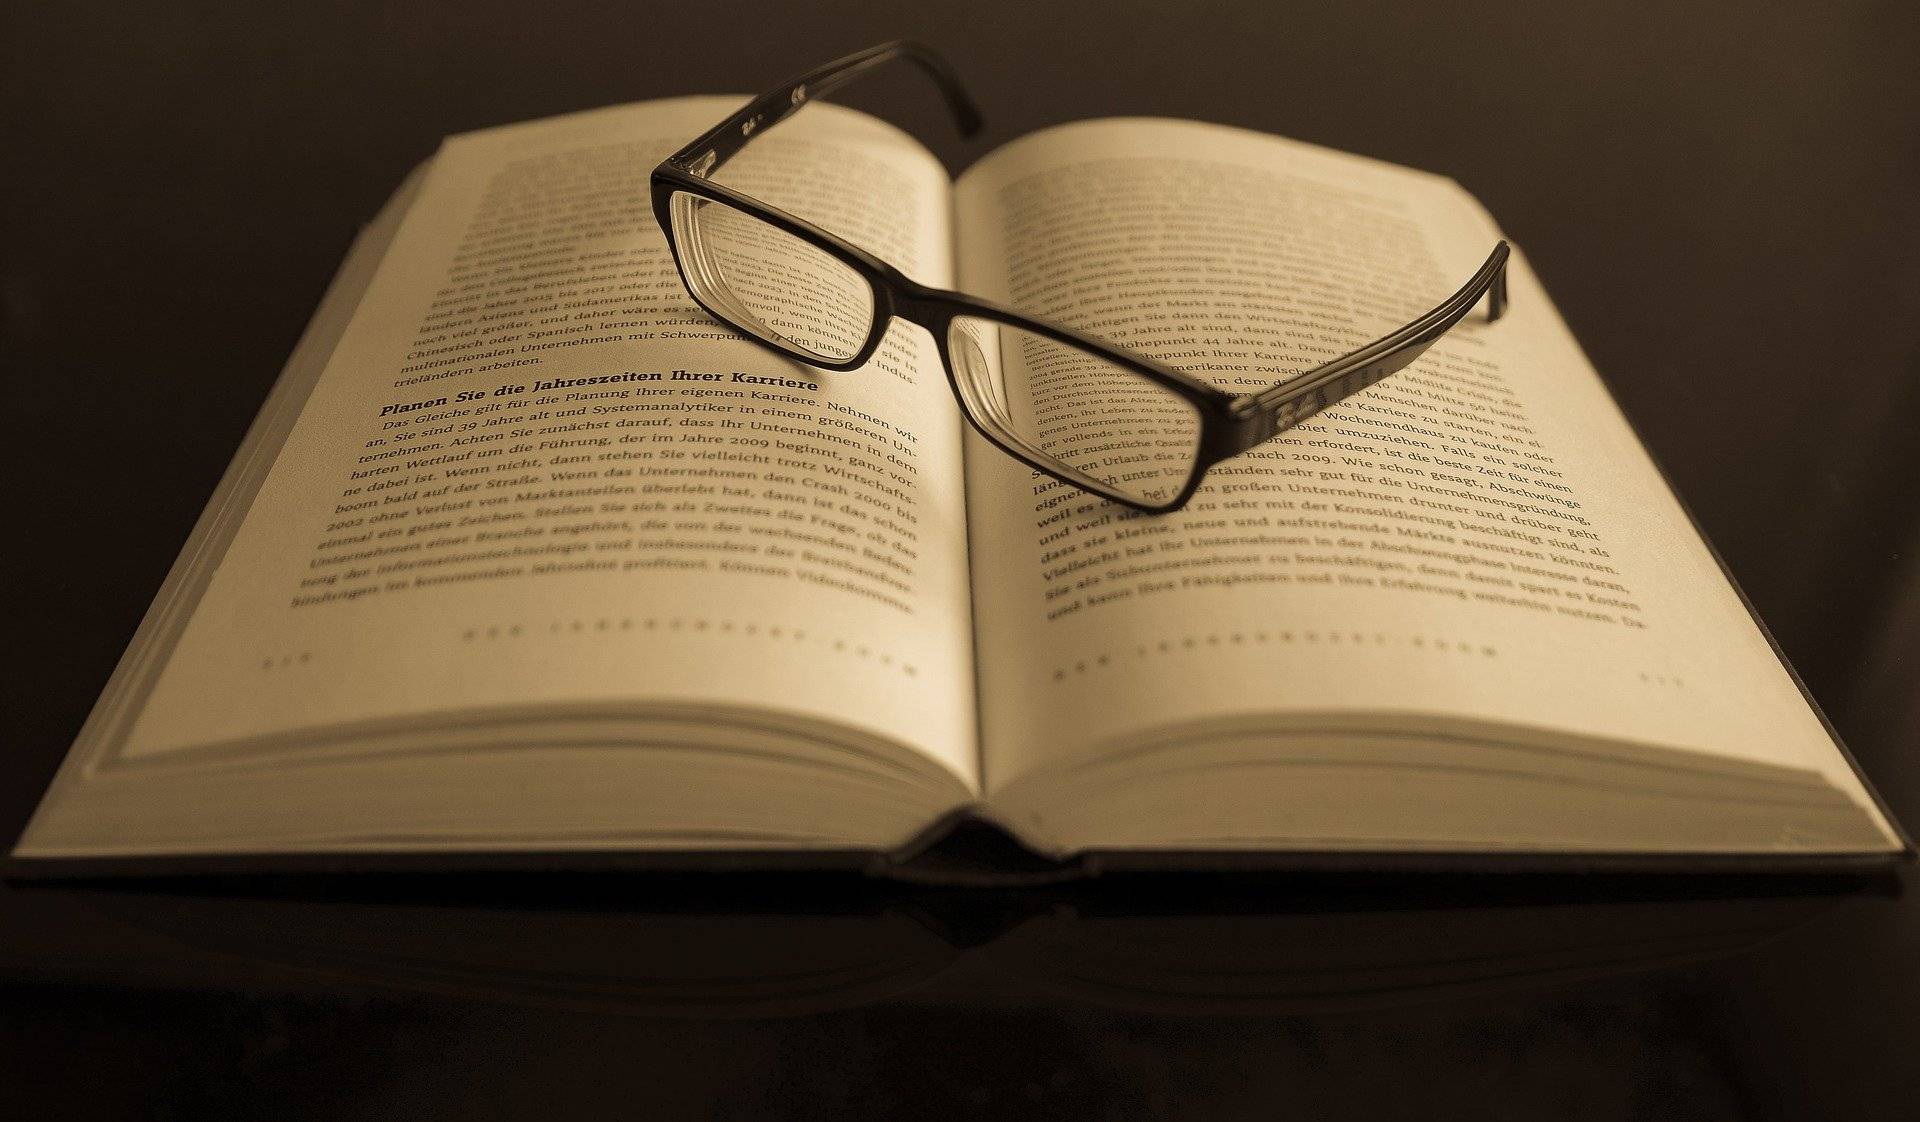 Half Readers vs. Half Moon Readers? Reading Glass Terminology can be Confusing!